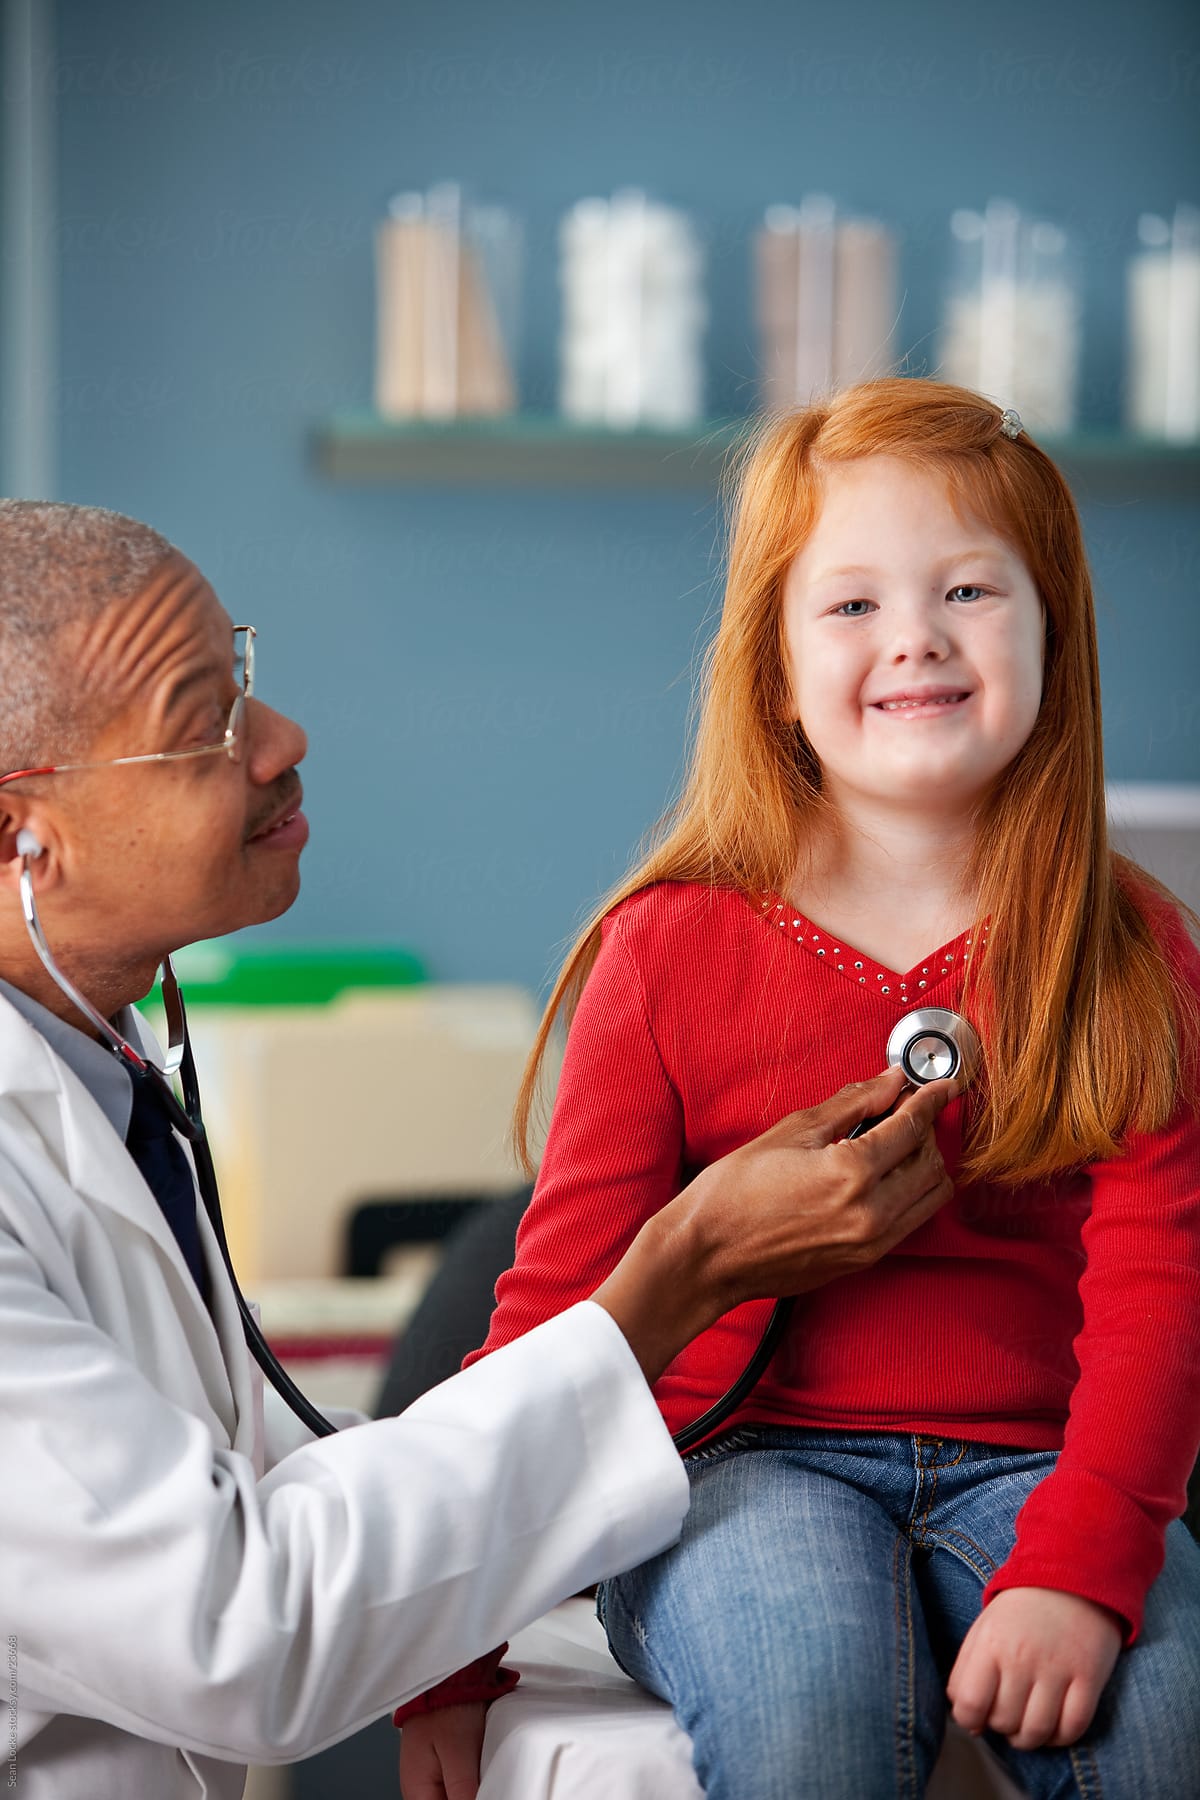 Exam Room: Girl Happy to Be Checked By Pediatrician